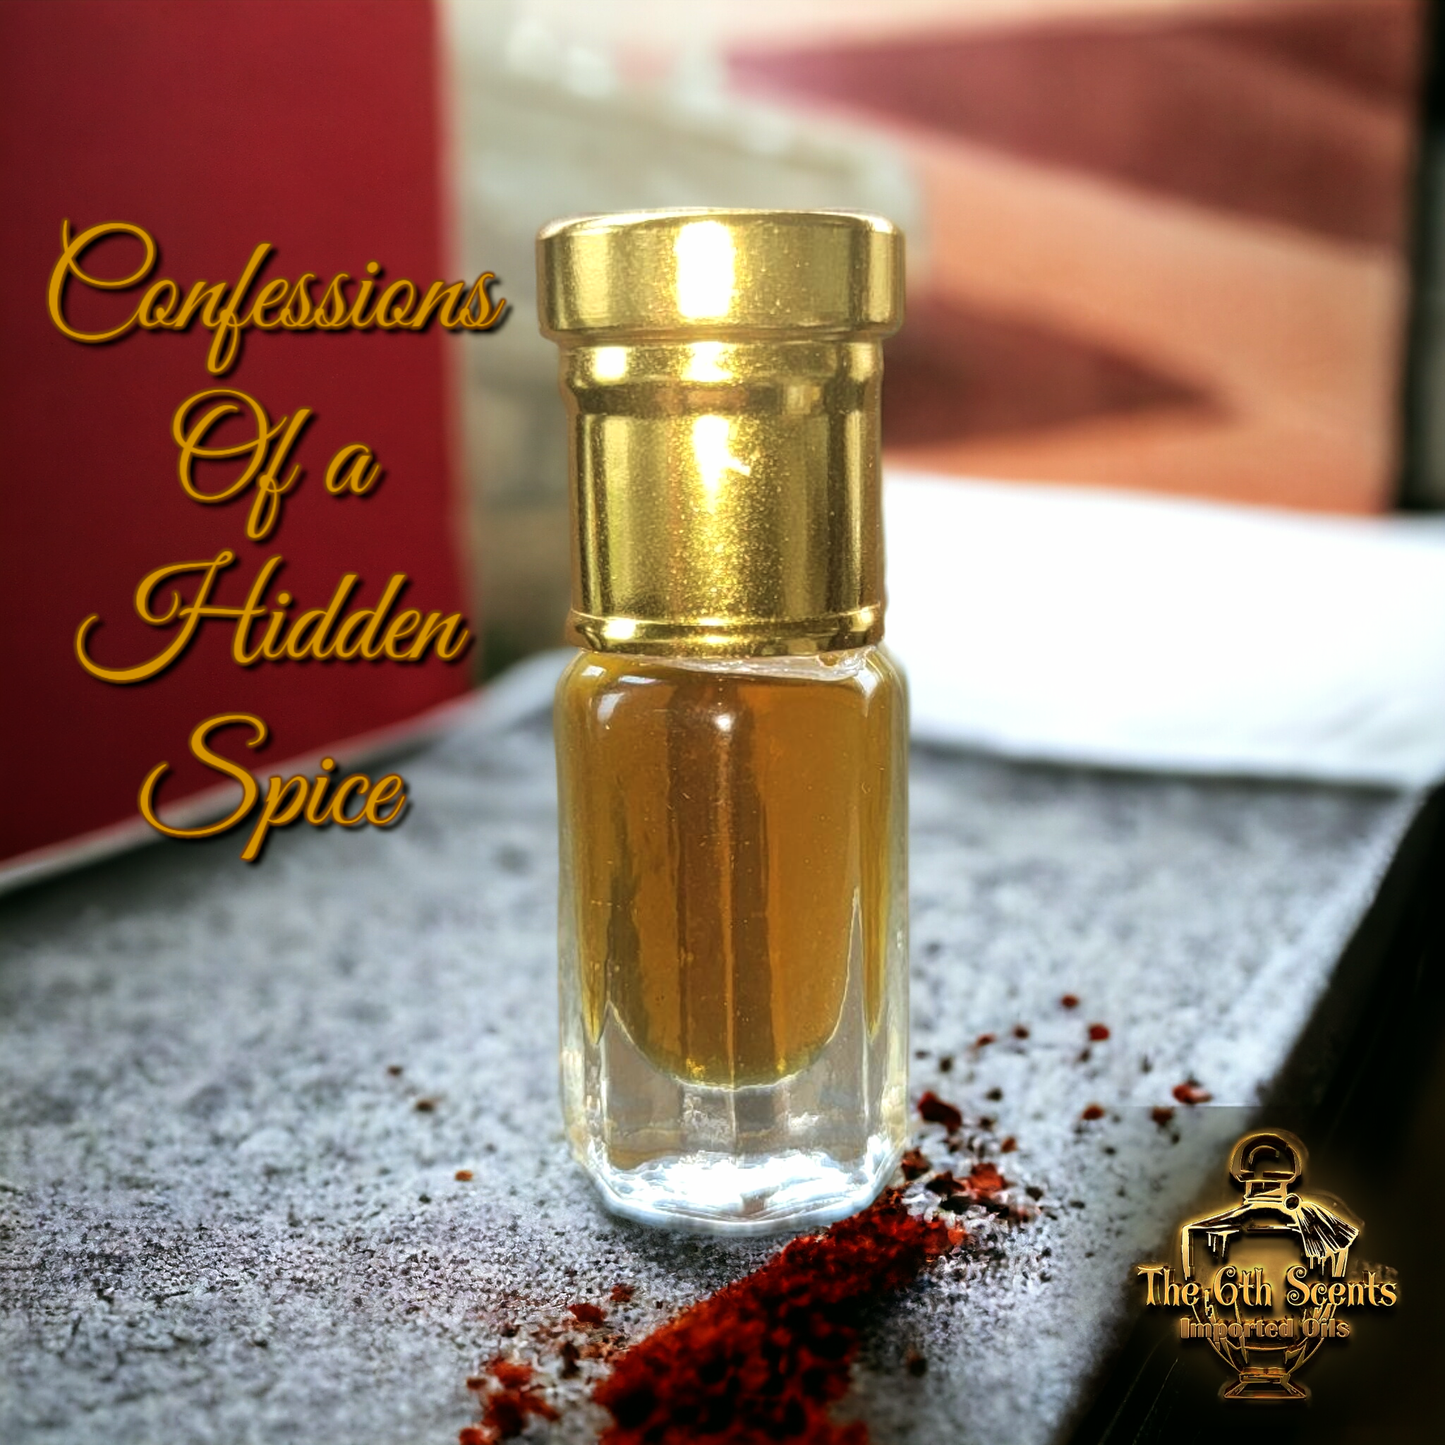 Confessions of a hidden spice